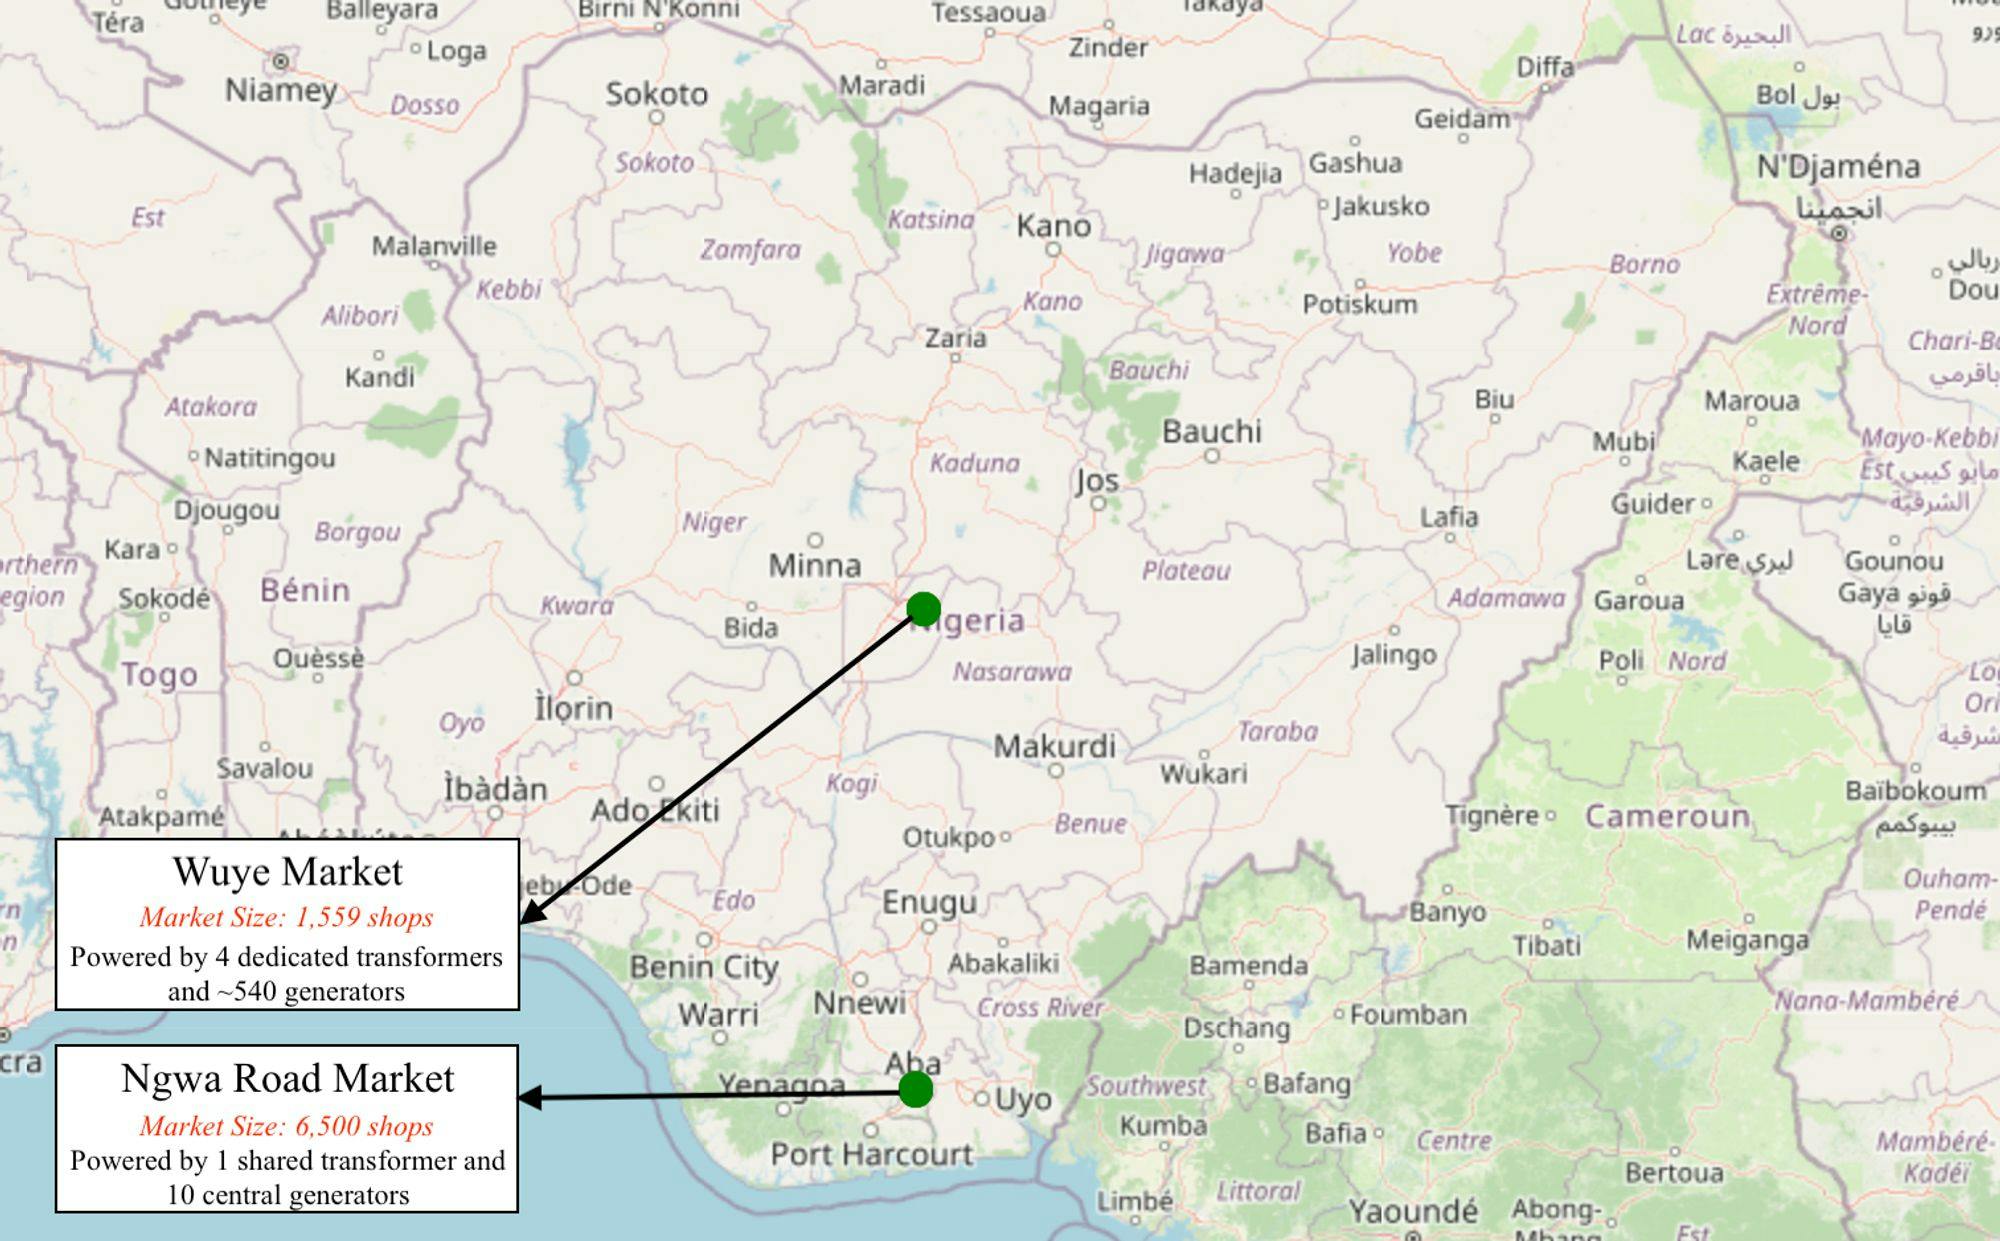 Figure 5: Geographic locations of Wuye and Ngwa Road markets. Wuye Market is located in Abuja, in the Federal Capital Territory (FCT), and Ngwa Road Market is located in Aba, in the southeast region of the country.